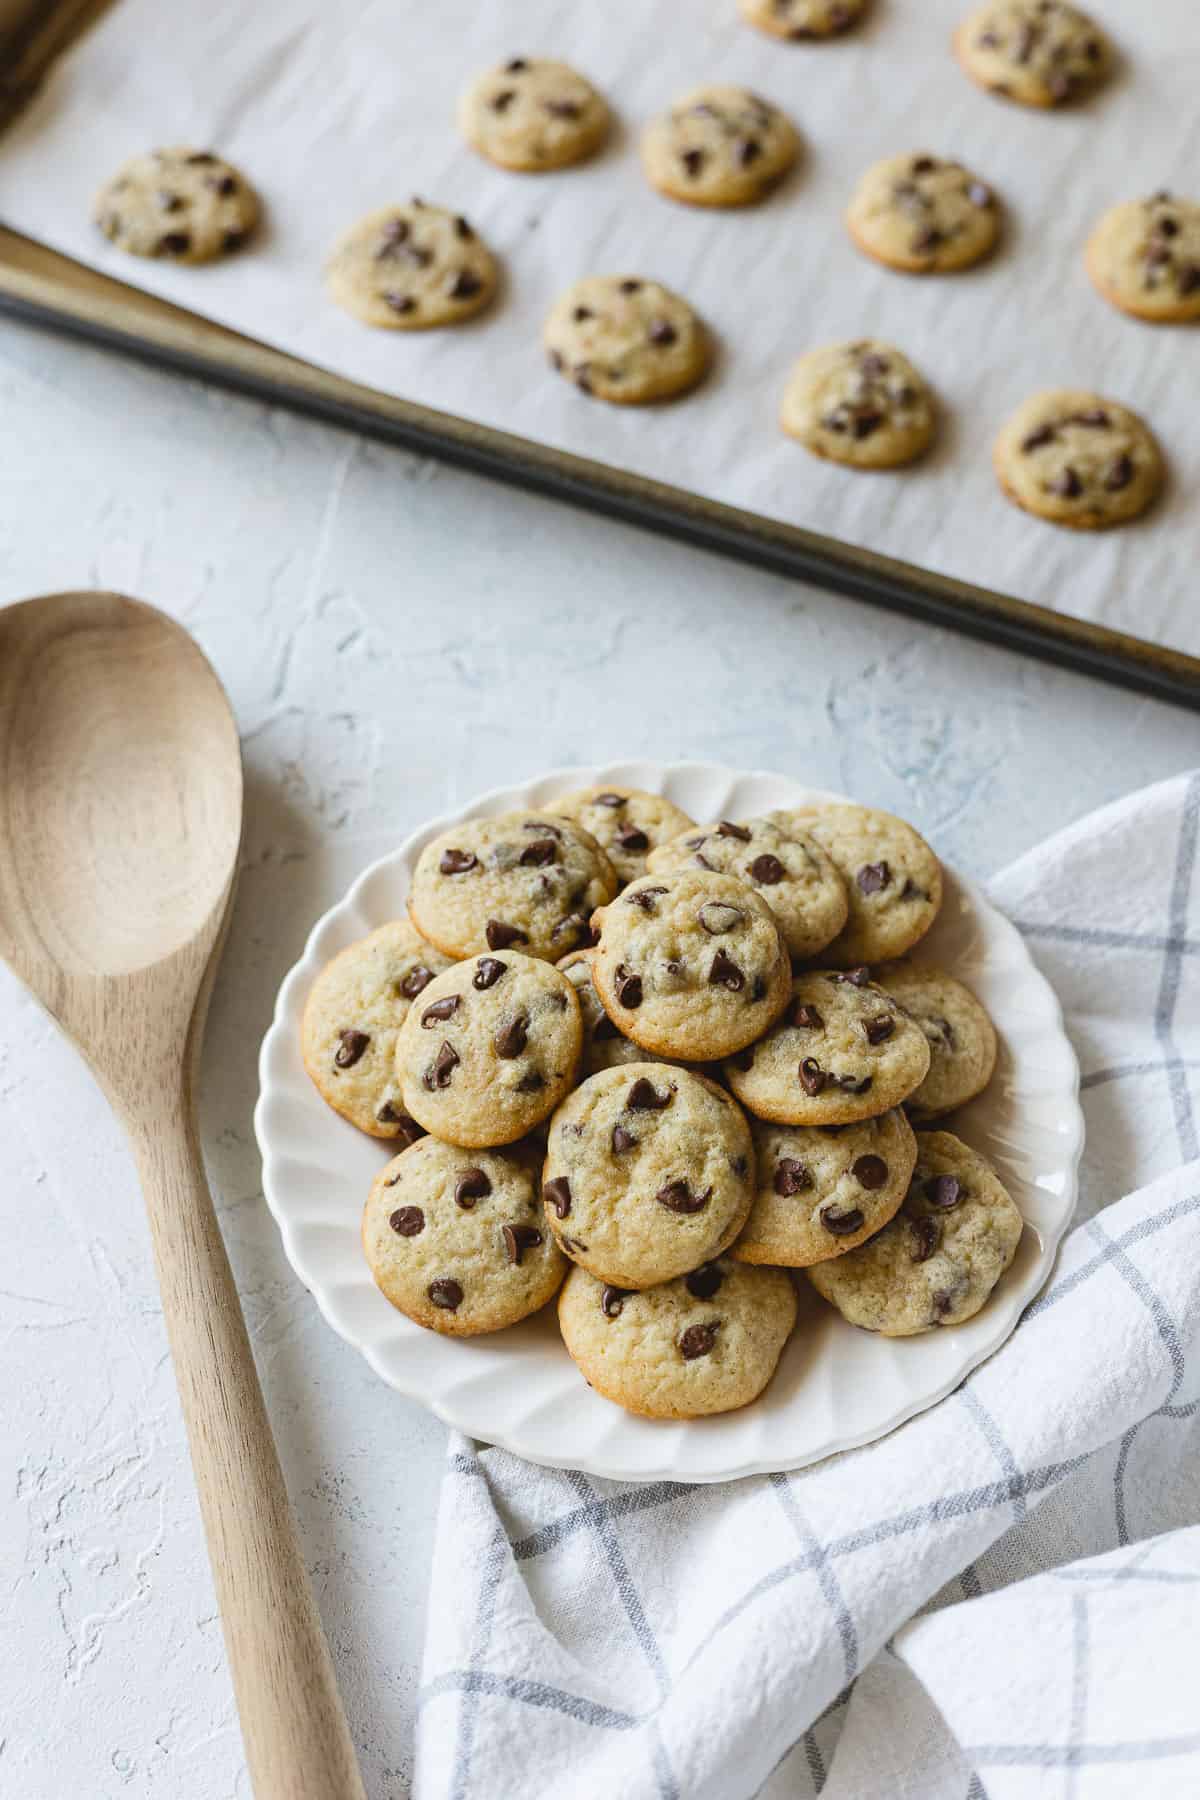 Mini chocolate chip cookies piled on a plate with a wooden spoon and blue-and-white towel.